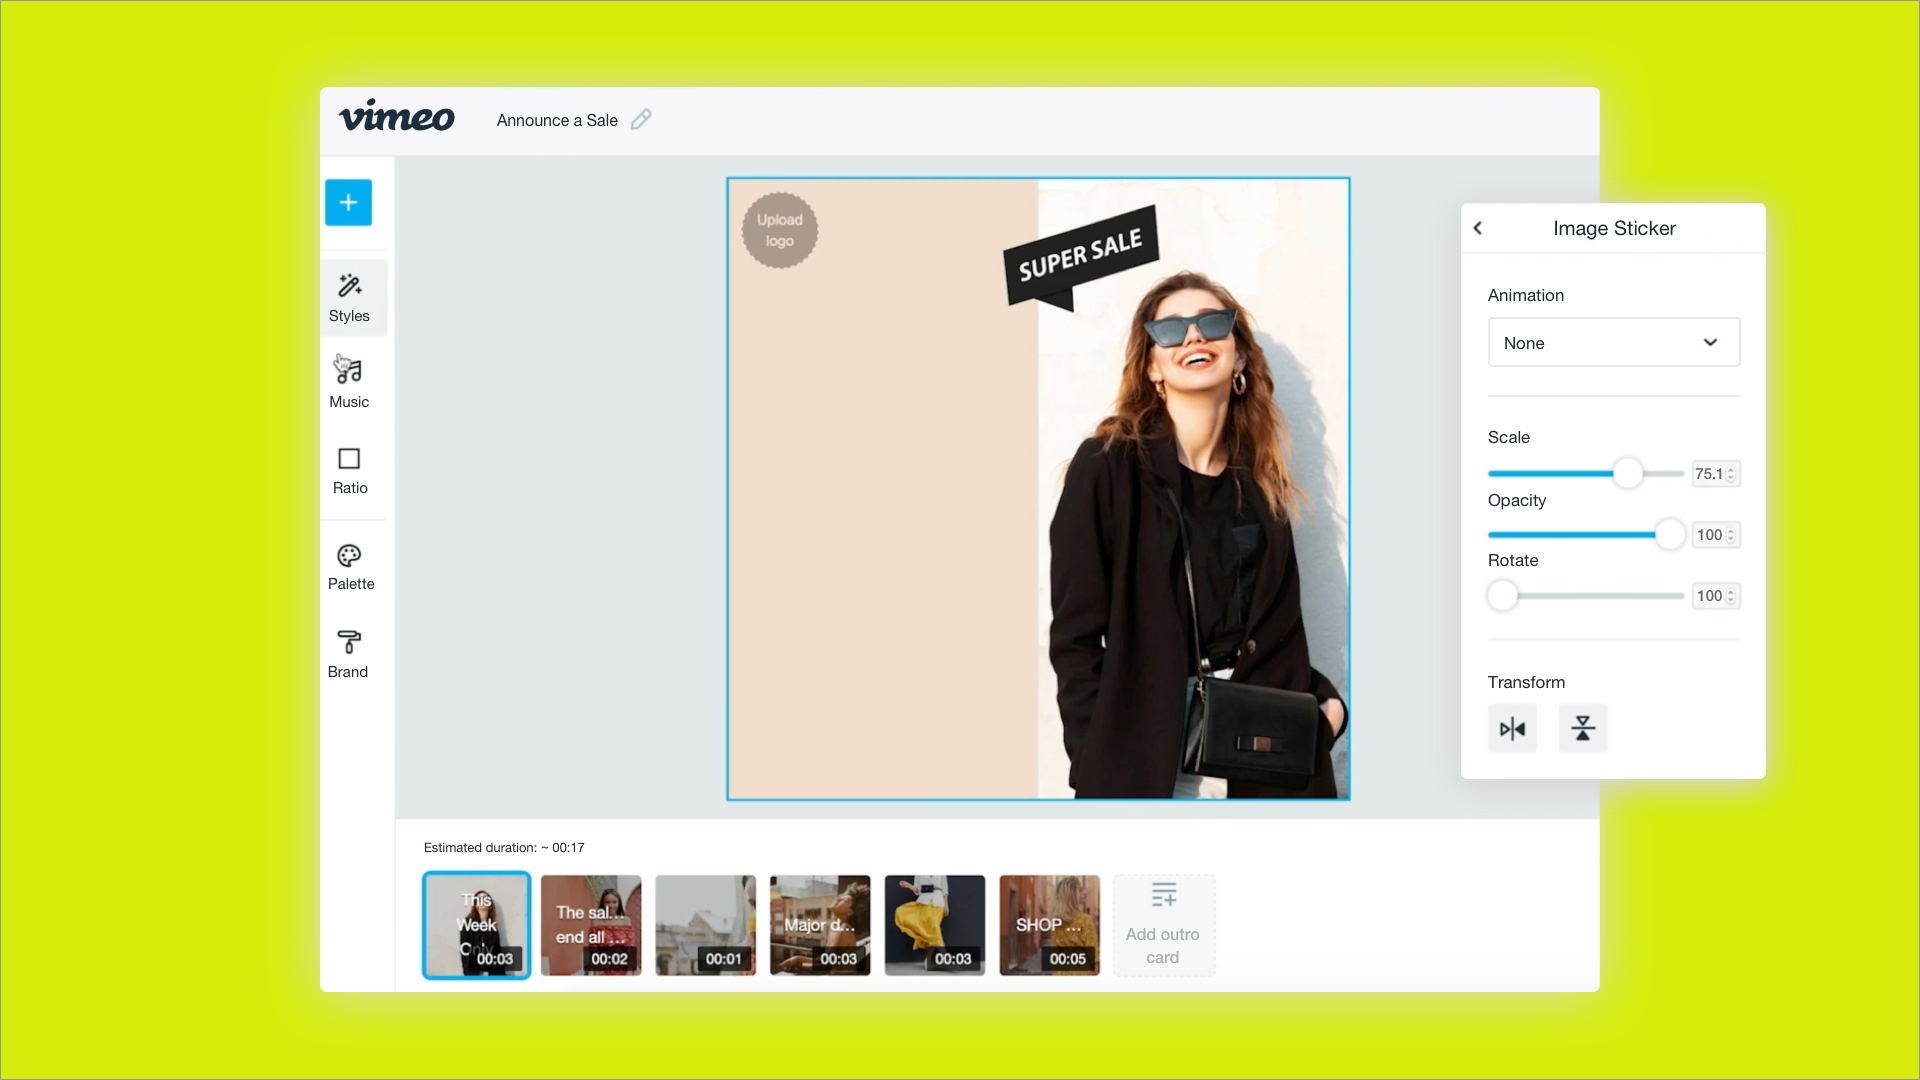 Vimeo video editor interface with “SUPER SALE” sticker on a fashion ad layout.